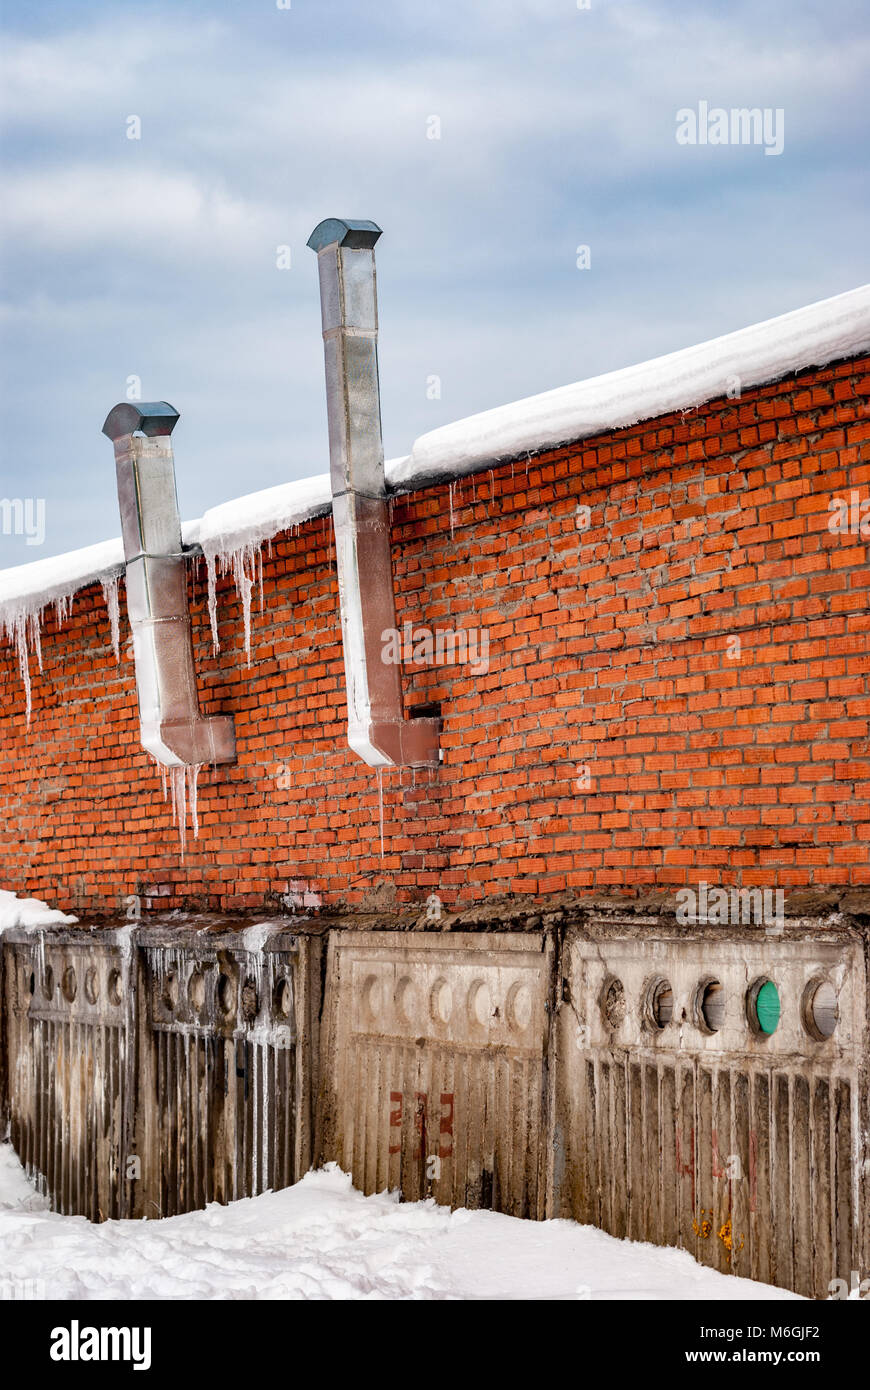 Red brick wall with ventilation pipes atop a concrete fence adorned with icicles, hinting at cold weather conditions Stock Photo